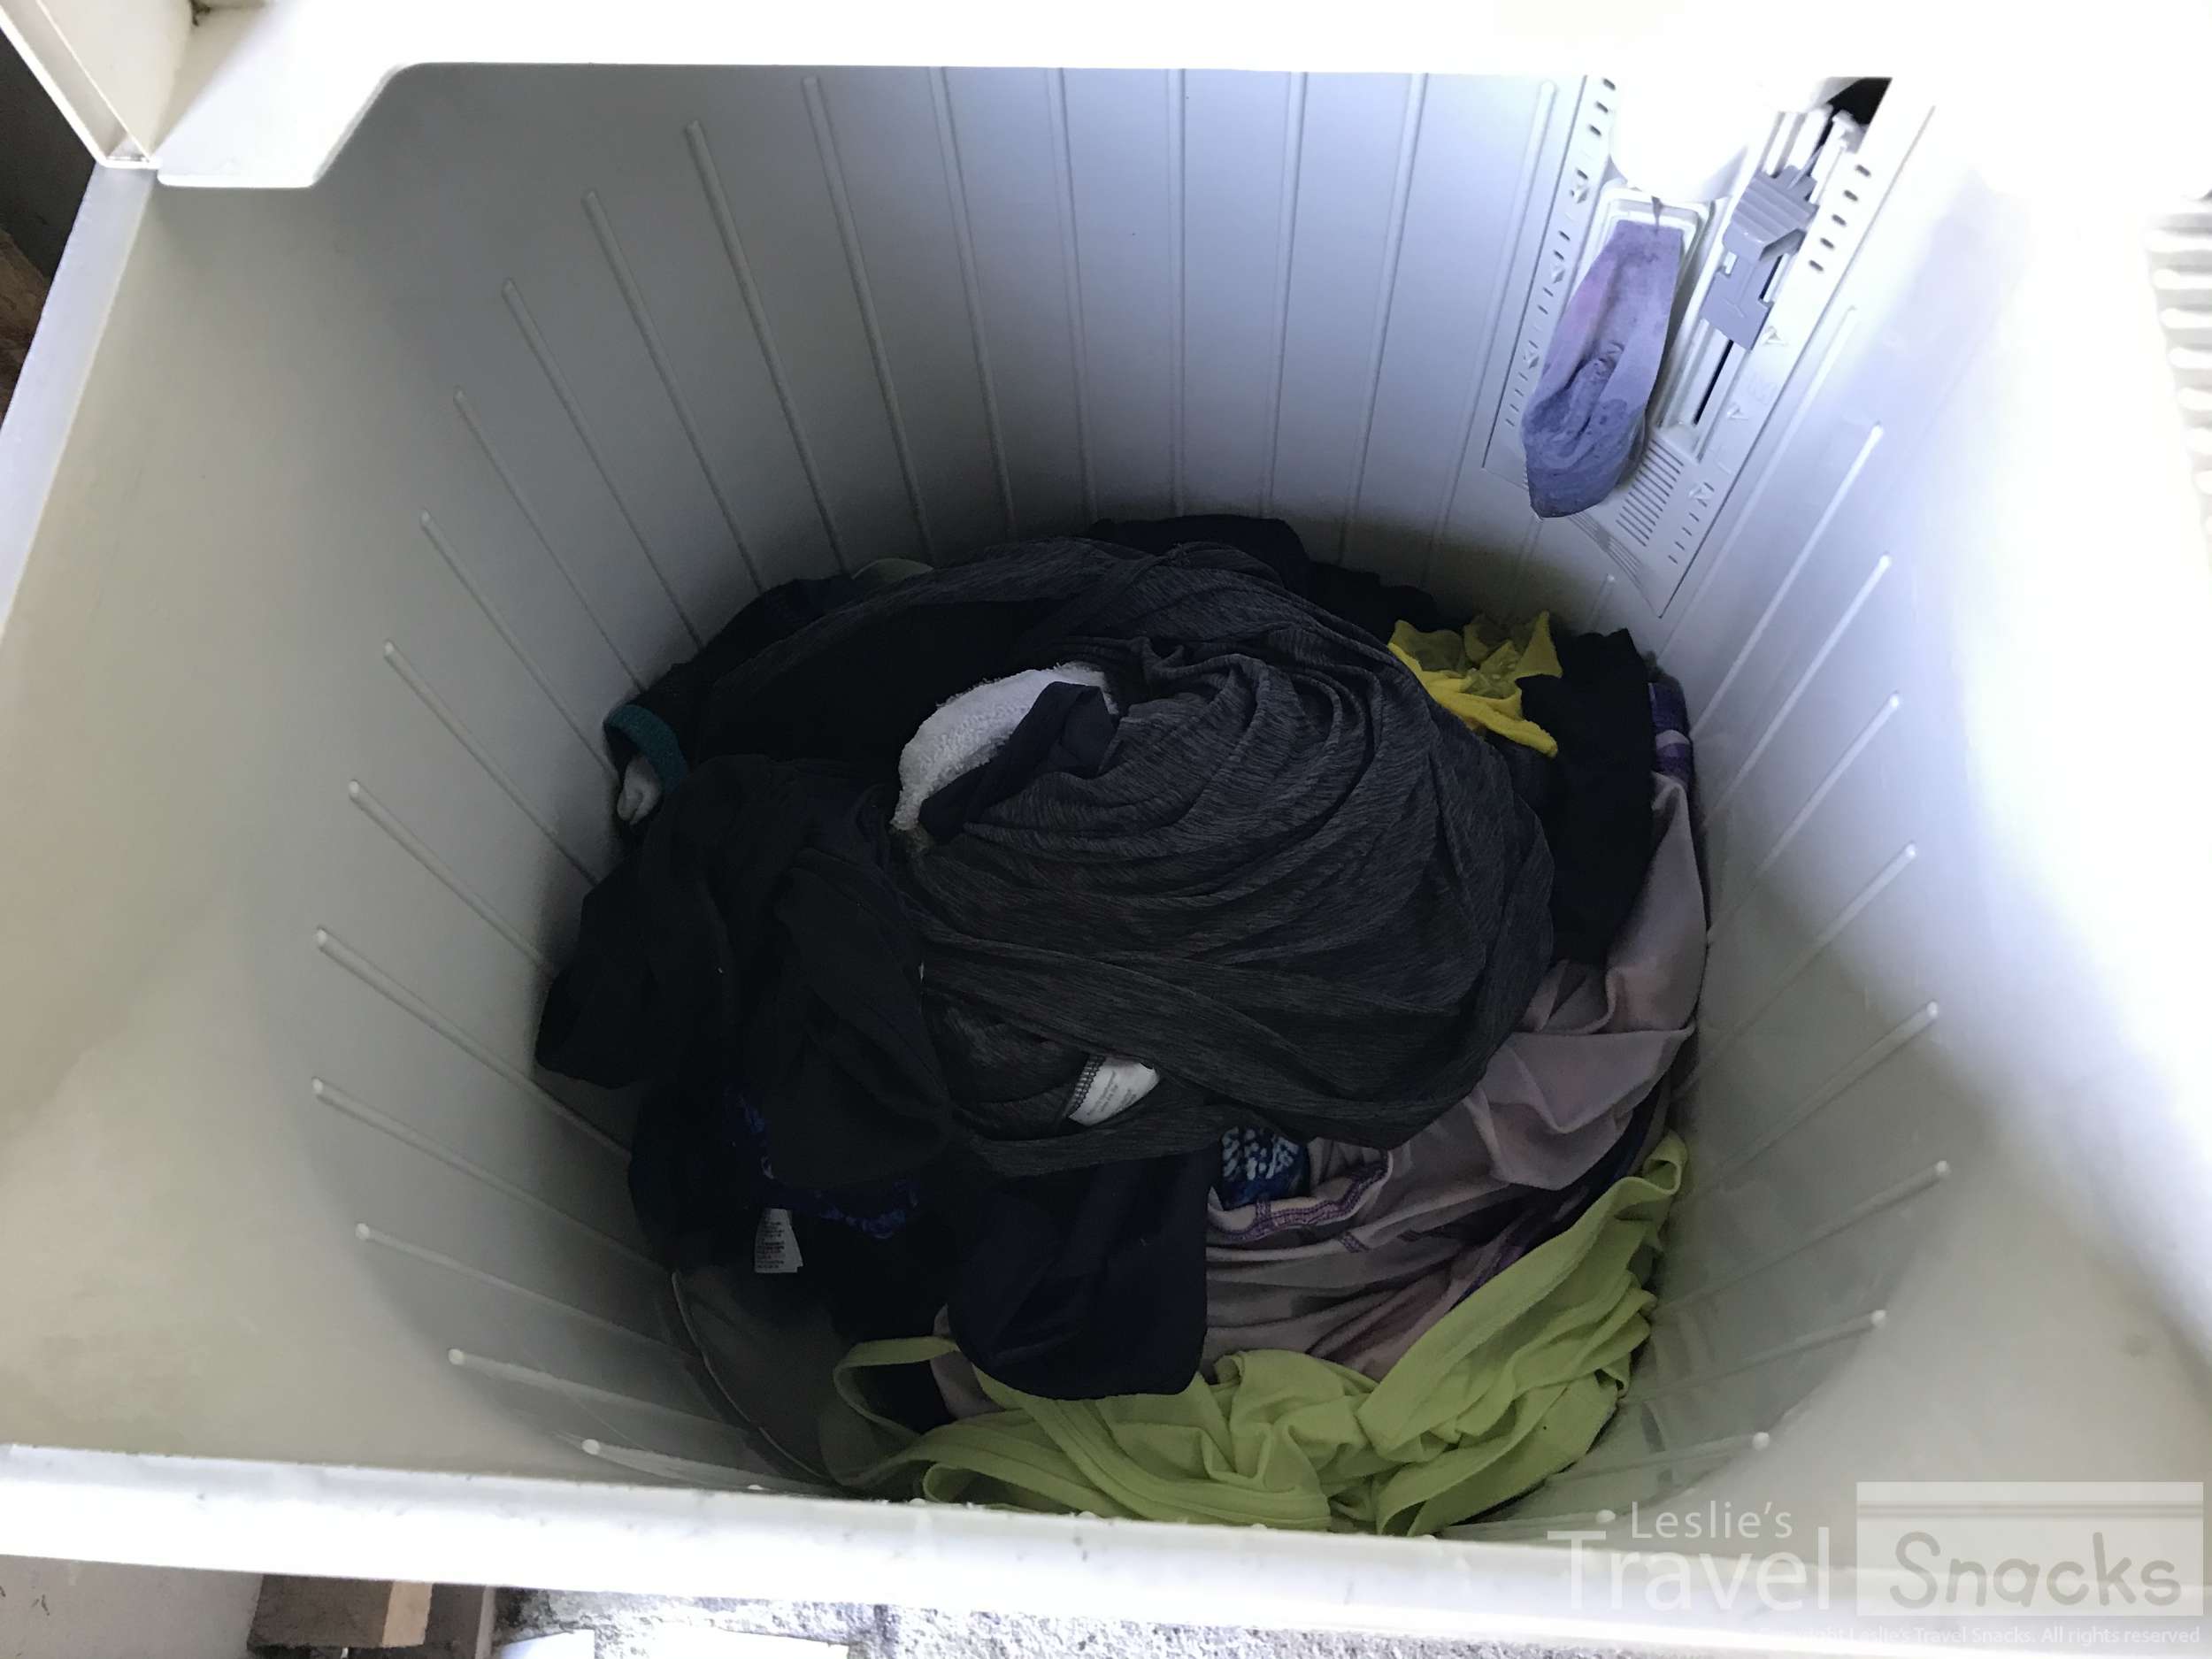 Moving your clothes after the yucky water drains out is a little better.